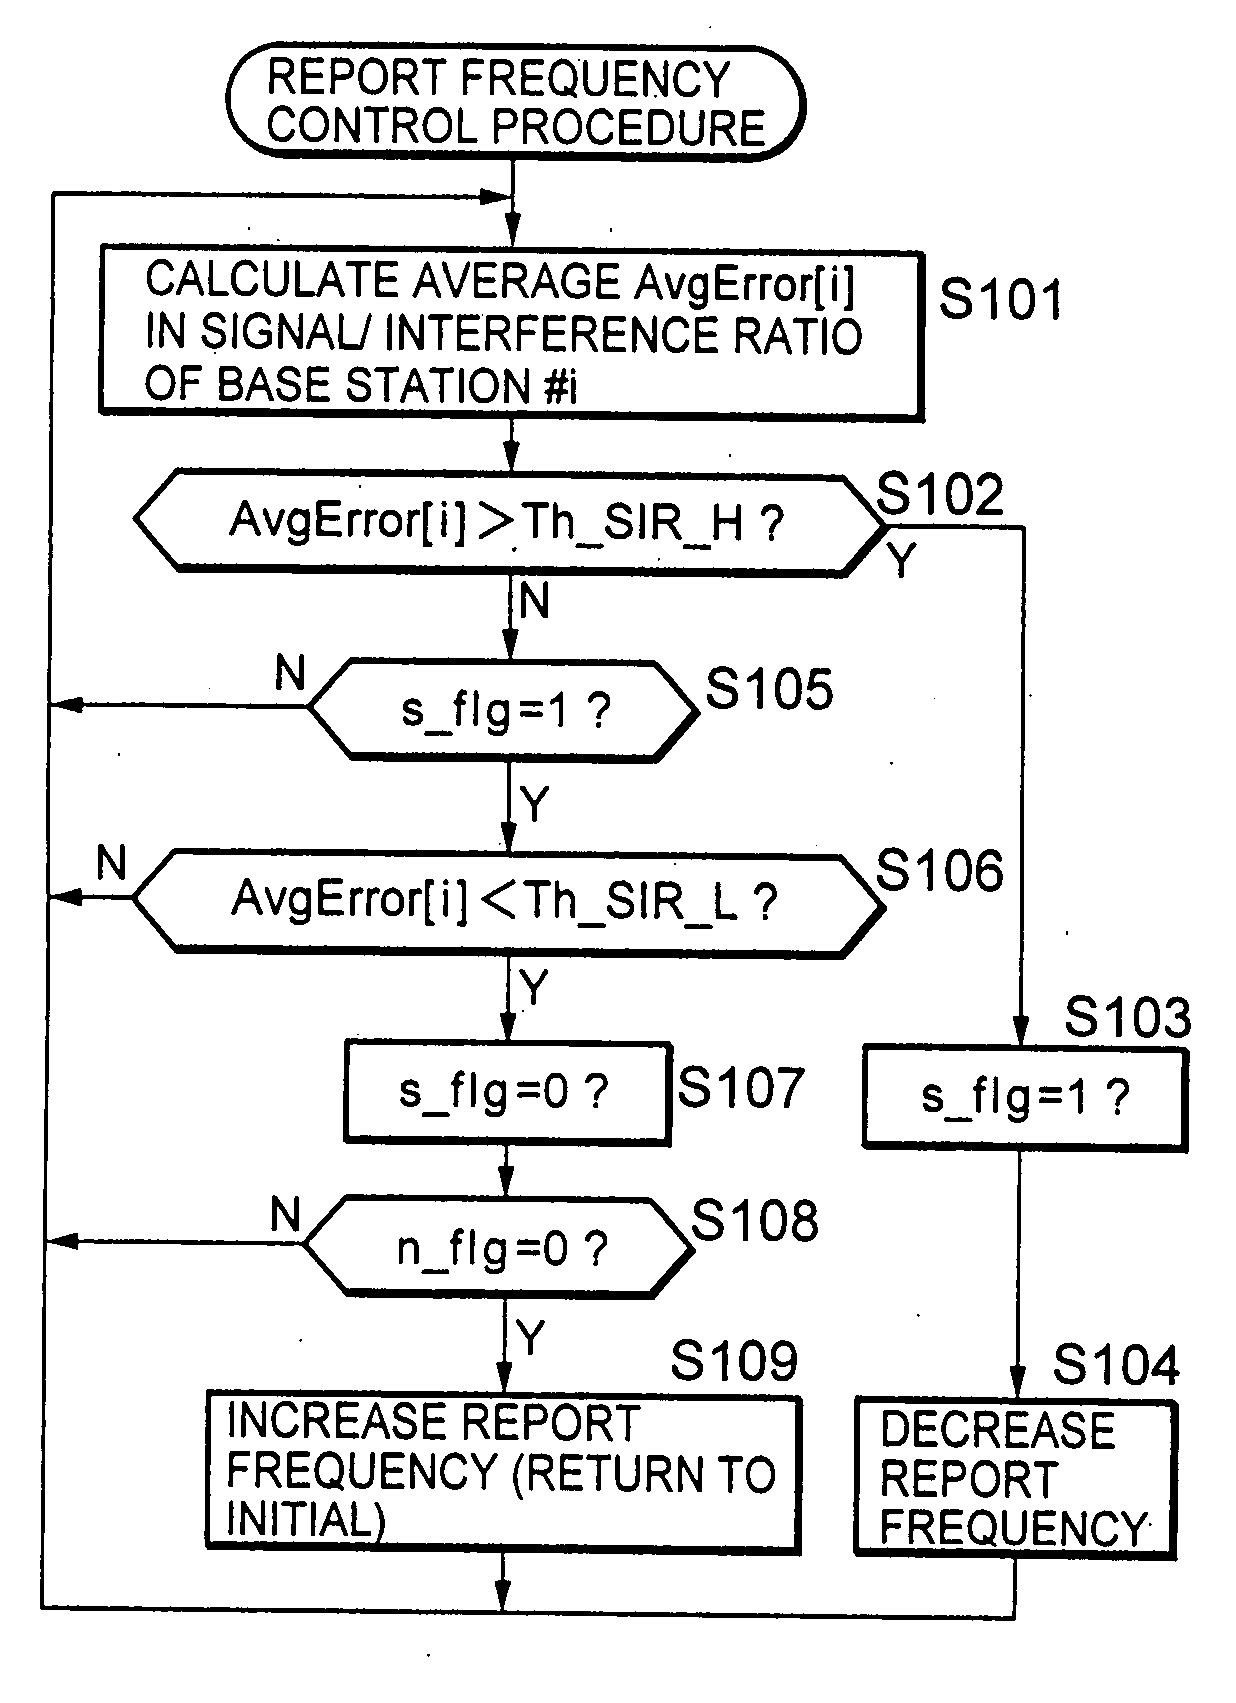 Information processing apparatus and communication apparatus